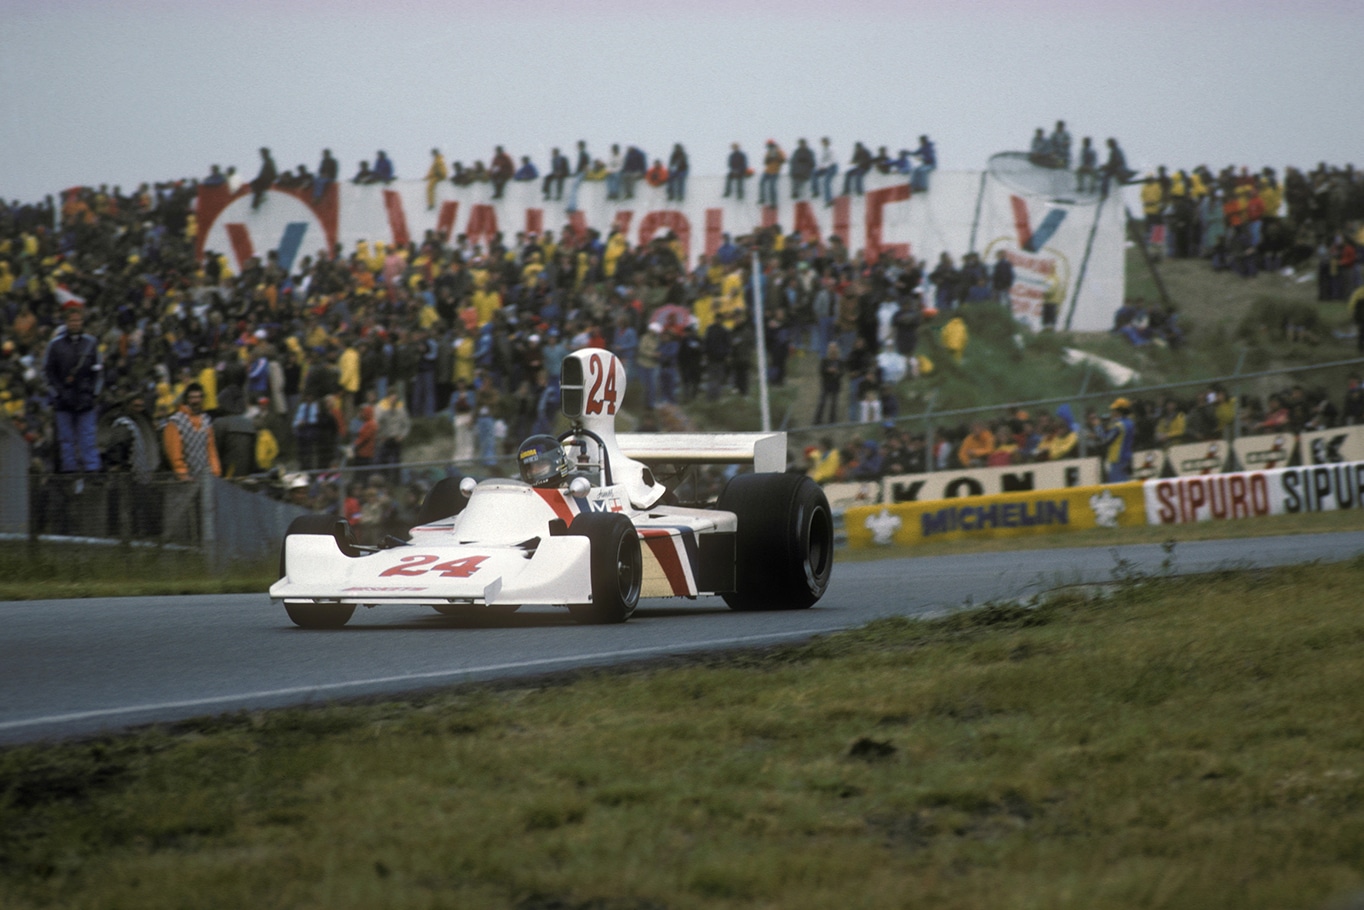 James Hunt on slicks as the track dries at Zandvoort during the 1975 Dutch Grand Prix